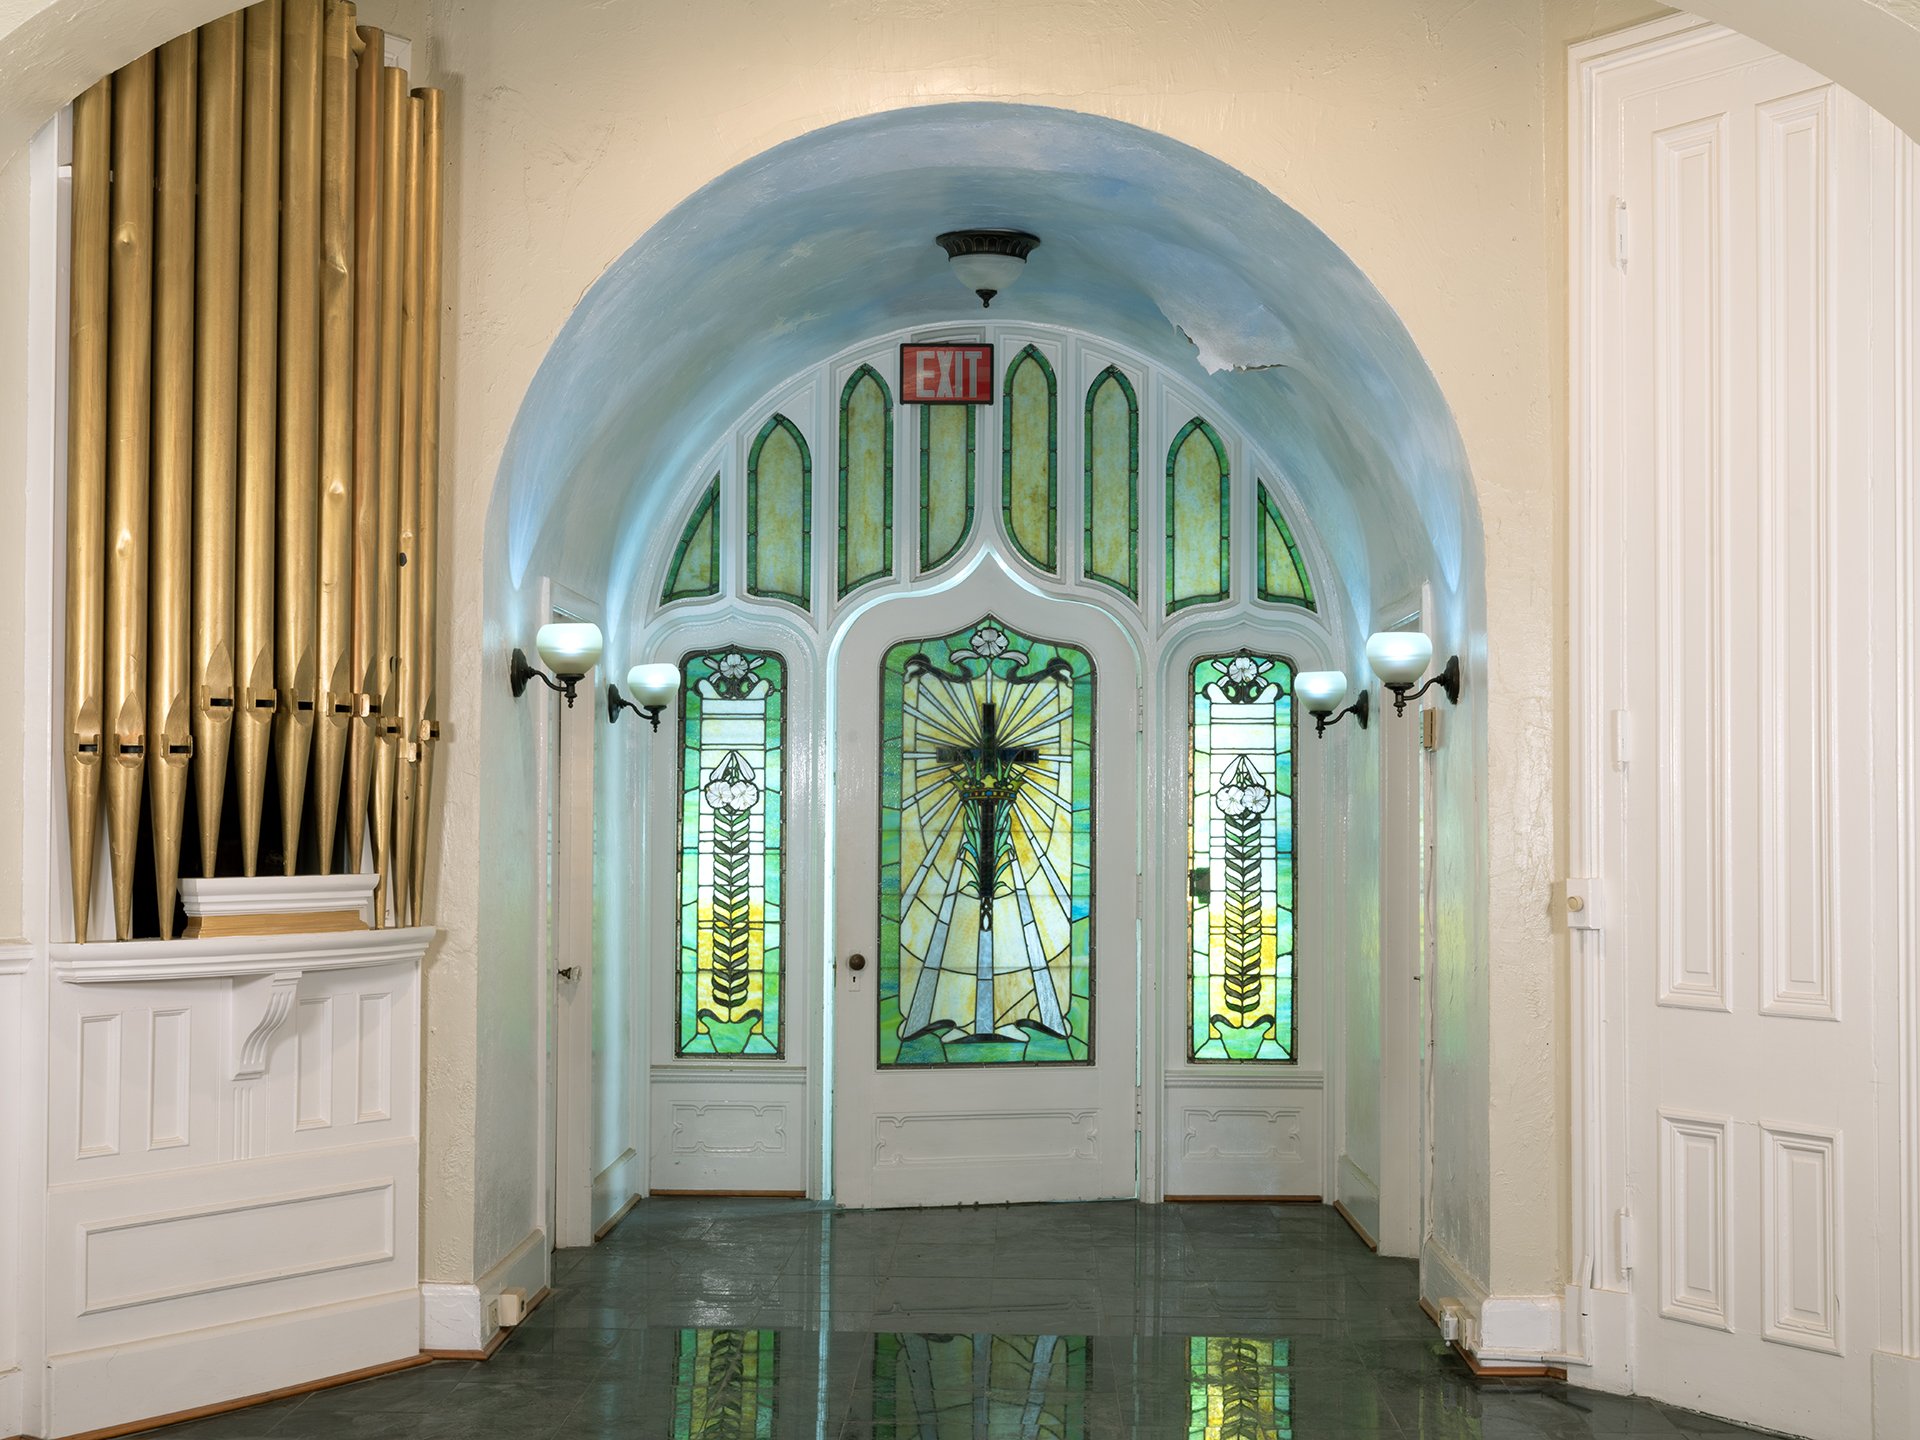 1st Floor Arch with Stain Glass Panel Door Closed_DSF3006-1  300dpi.jpg